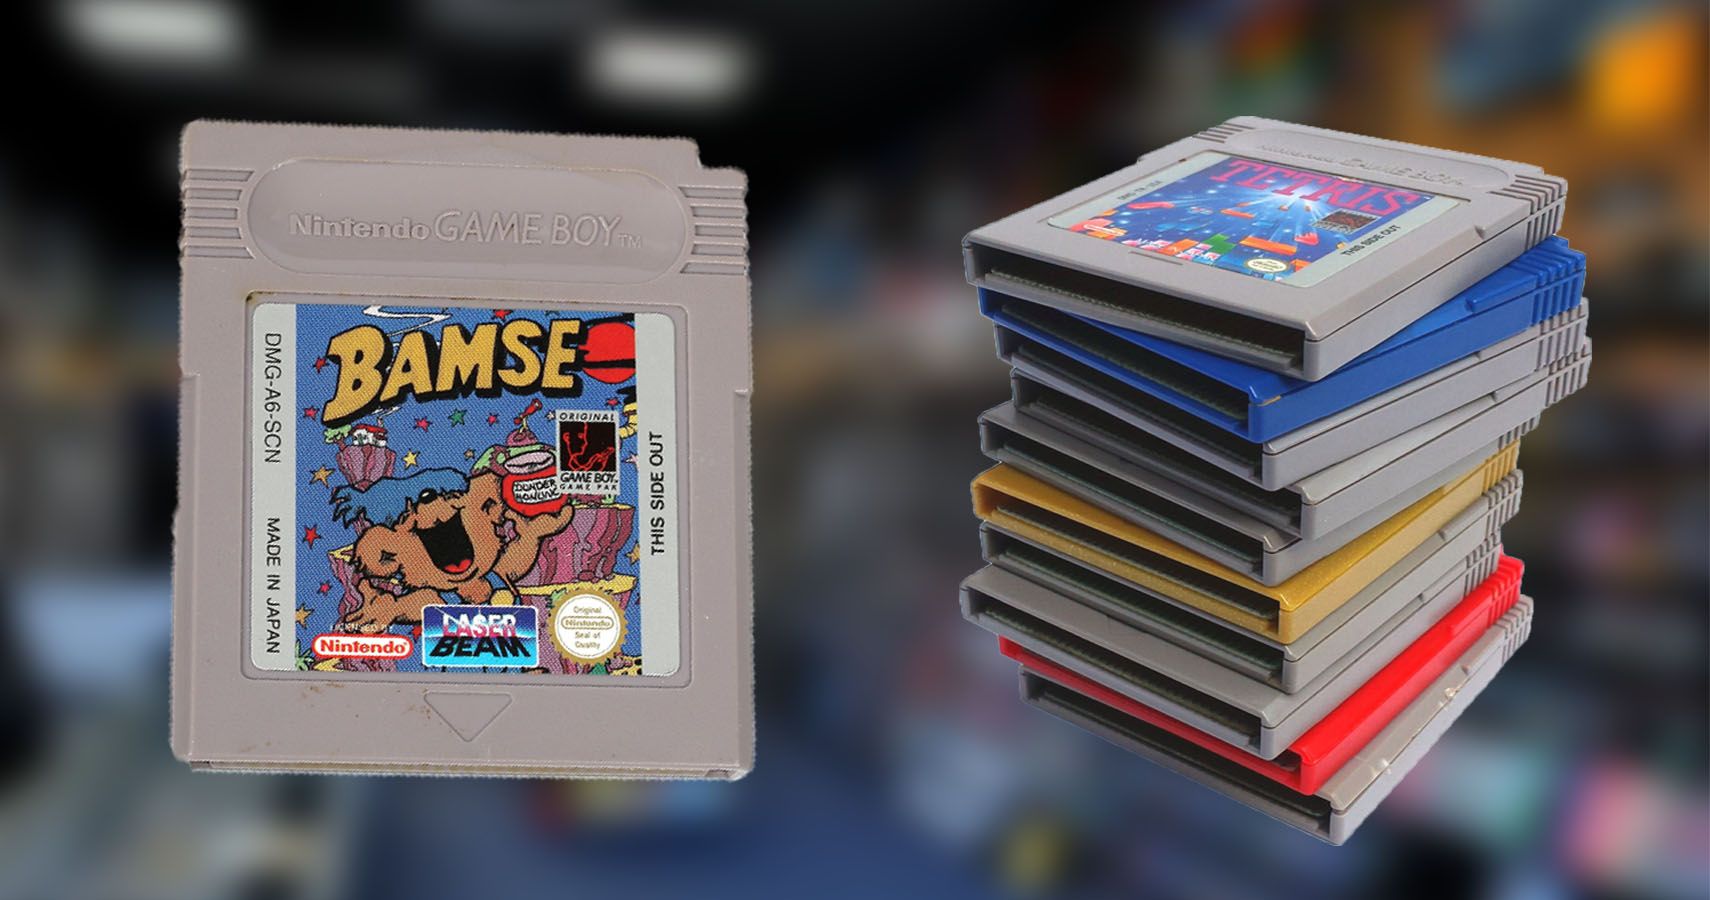 The 5 Hardest To Find Game Boy Games (& The 5 Most Commonly Found)